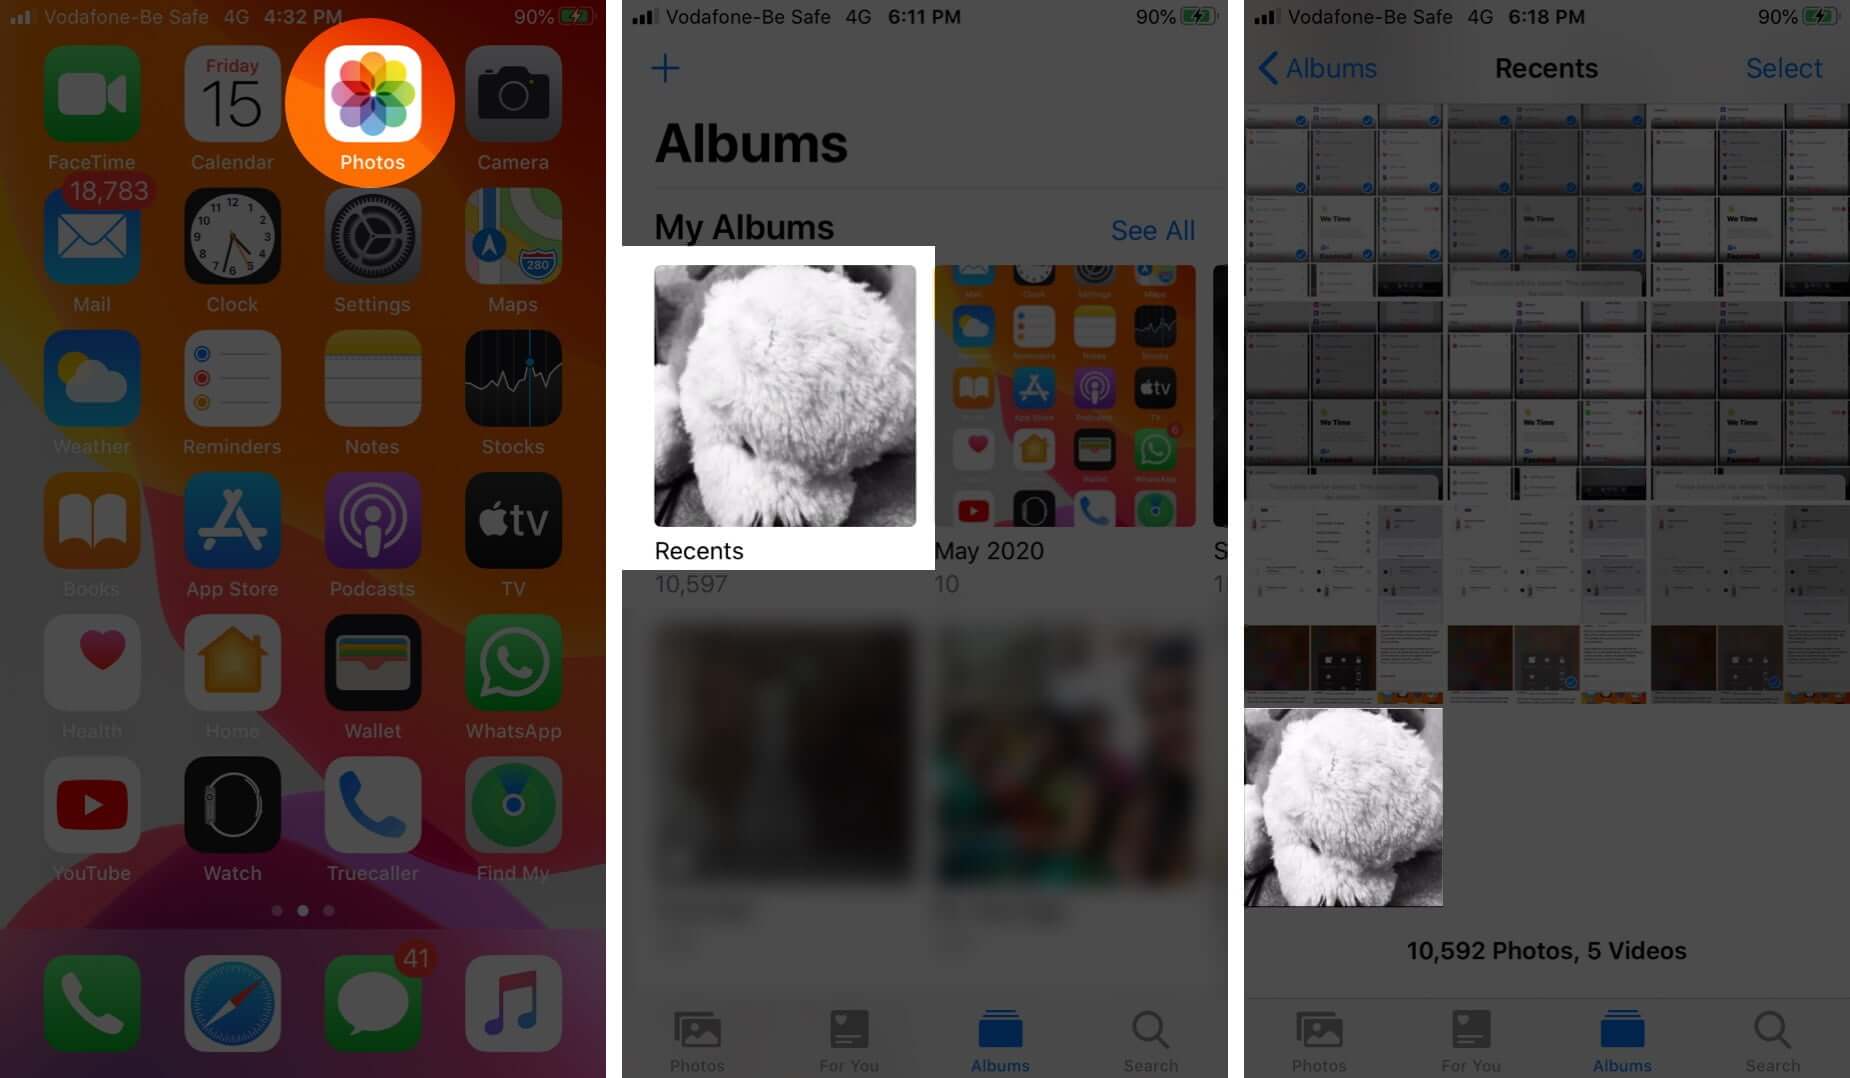 open photos app tap on album and then tap on edited photo